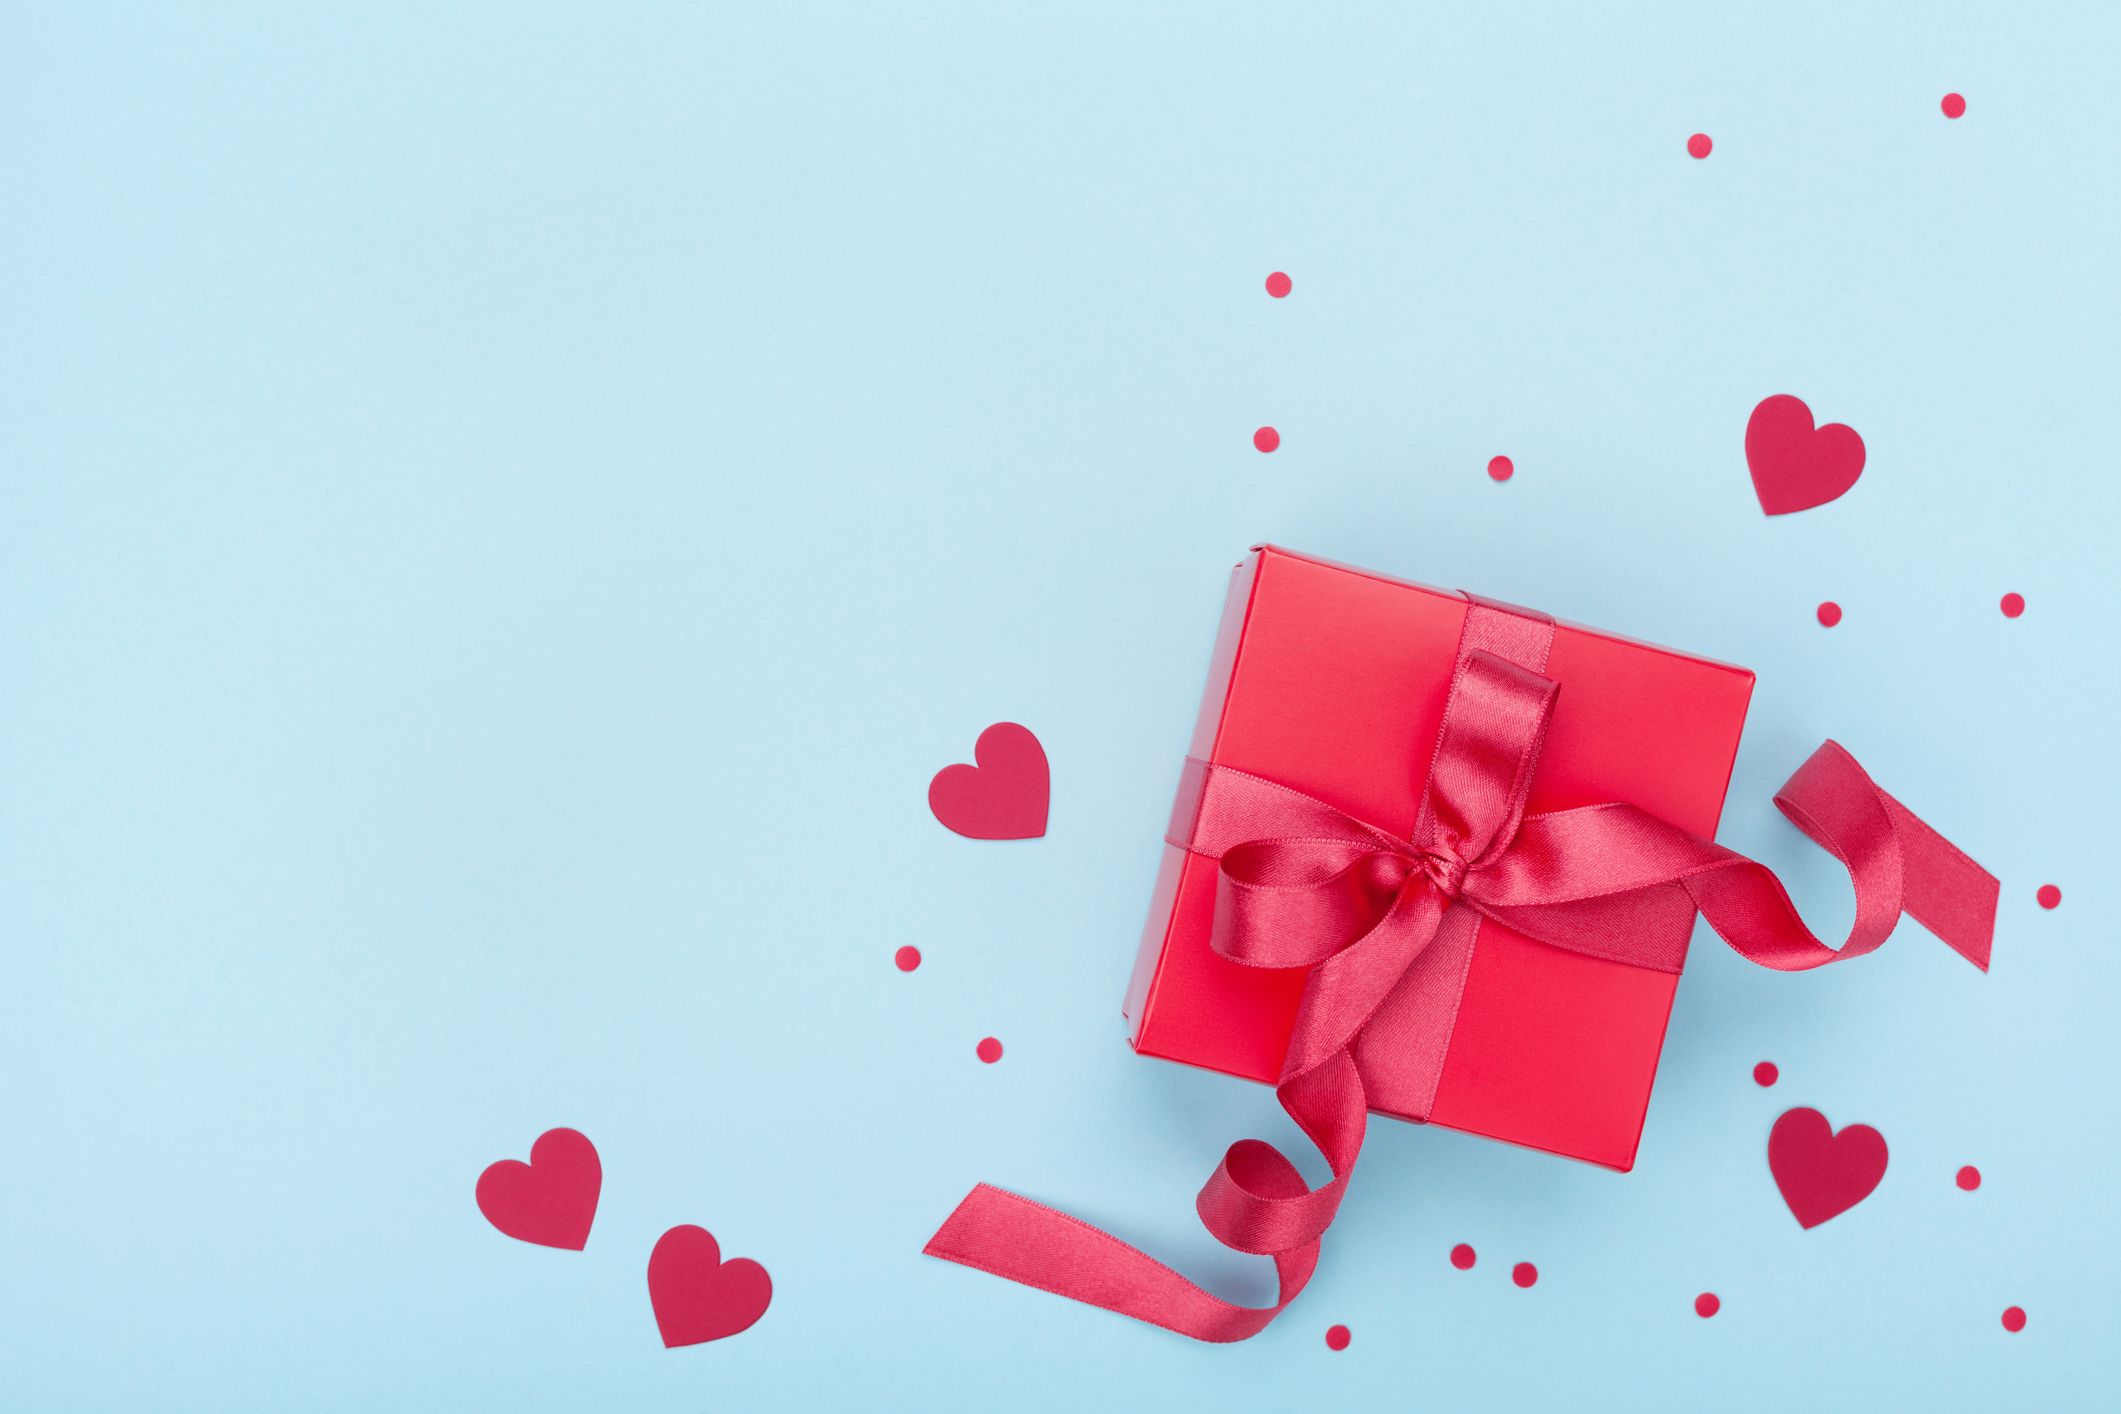 This Valentine's Day, shower your partner with thoughtfully curated gifts to make them feel special